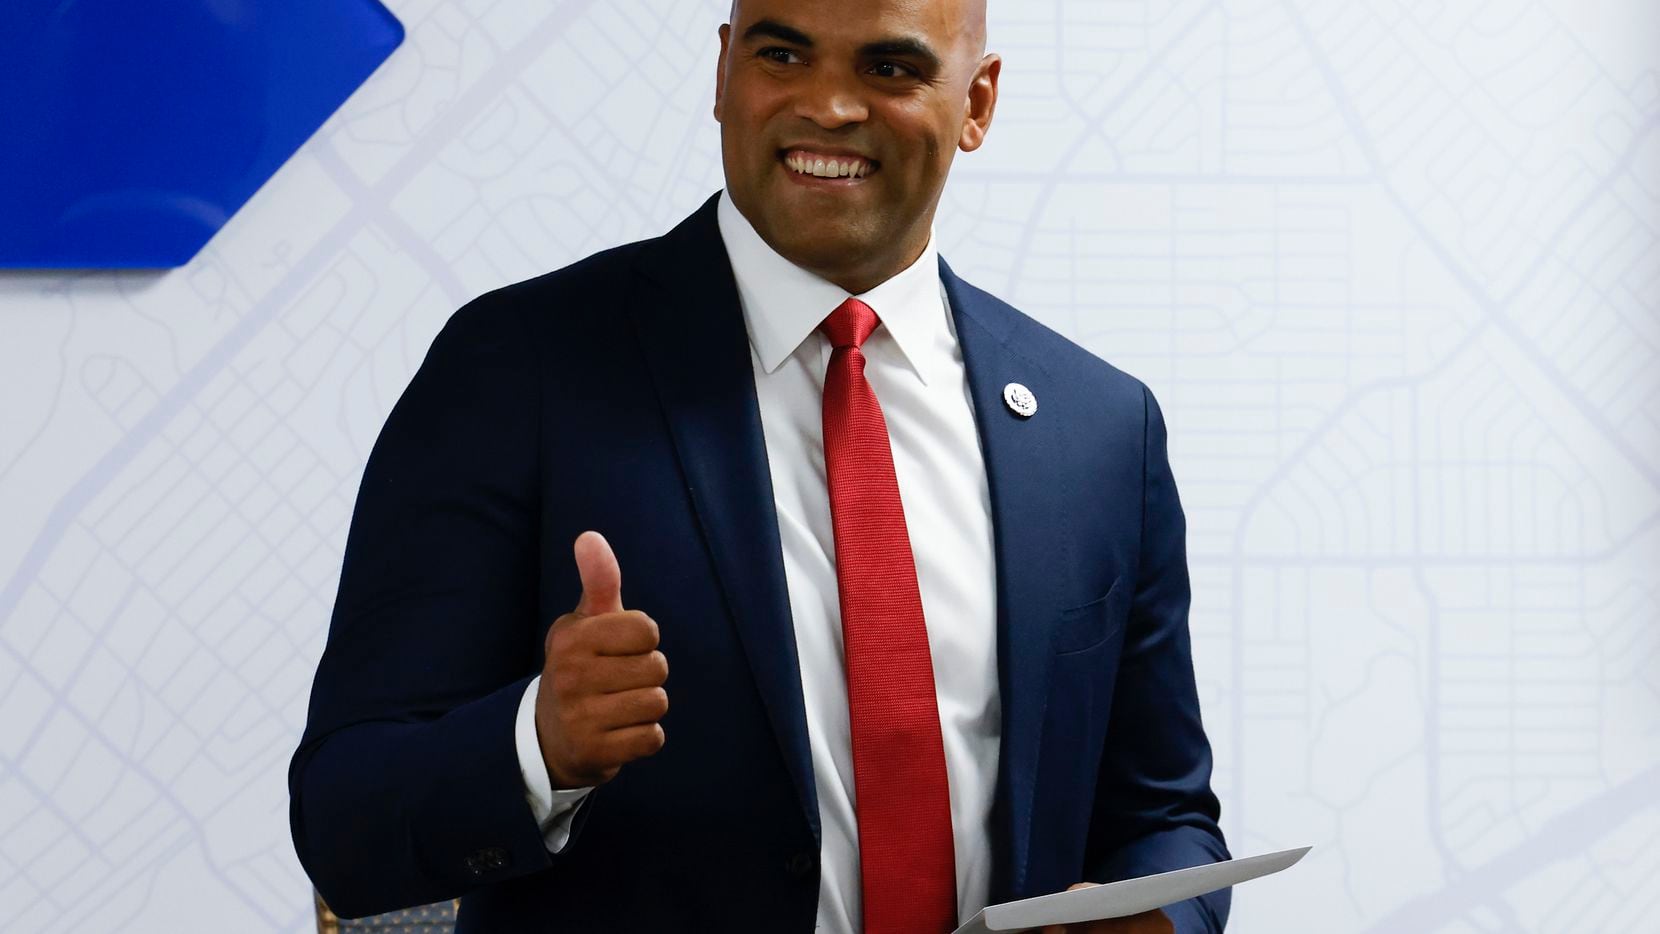 Rep. Colin Allred, D-Texas, gestures towards the crowd during an award presentation at North...